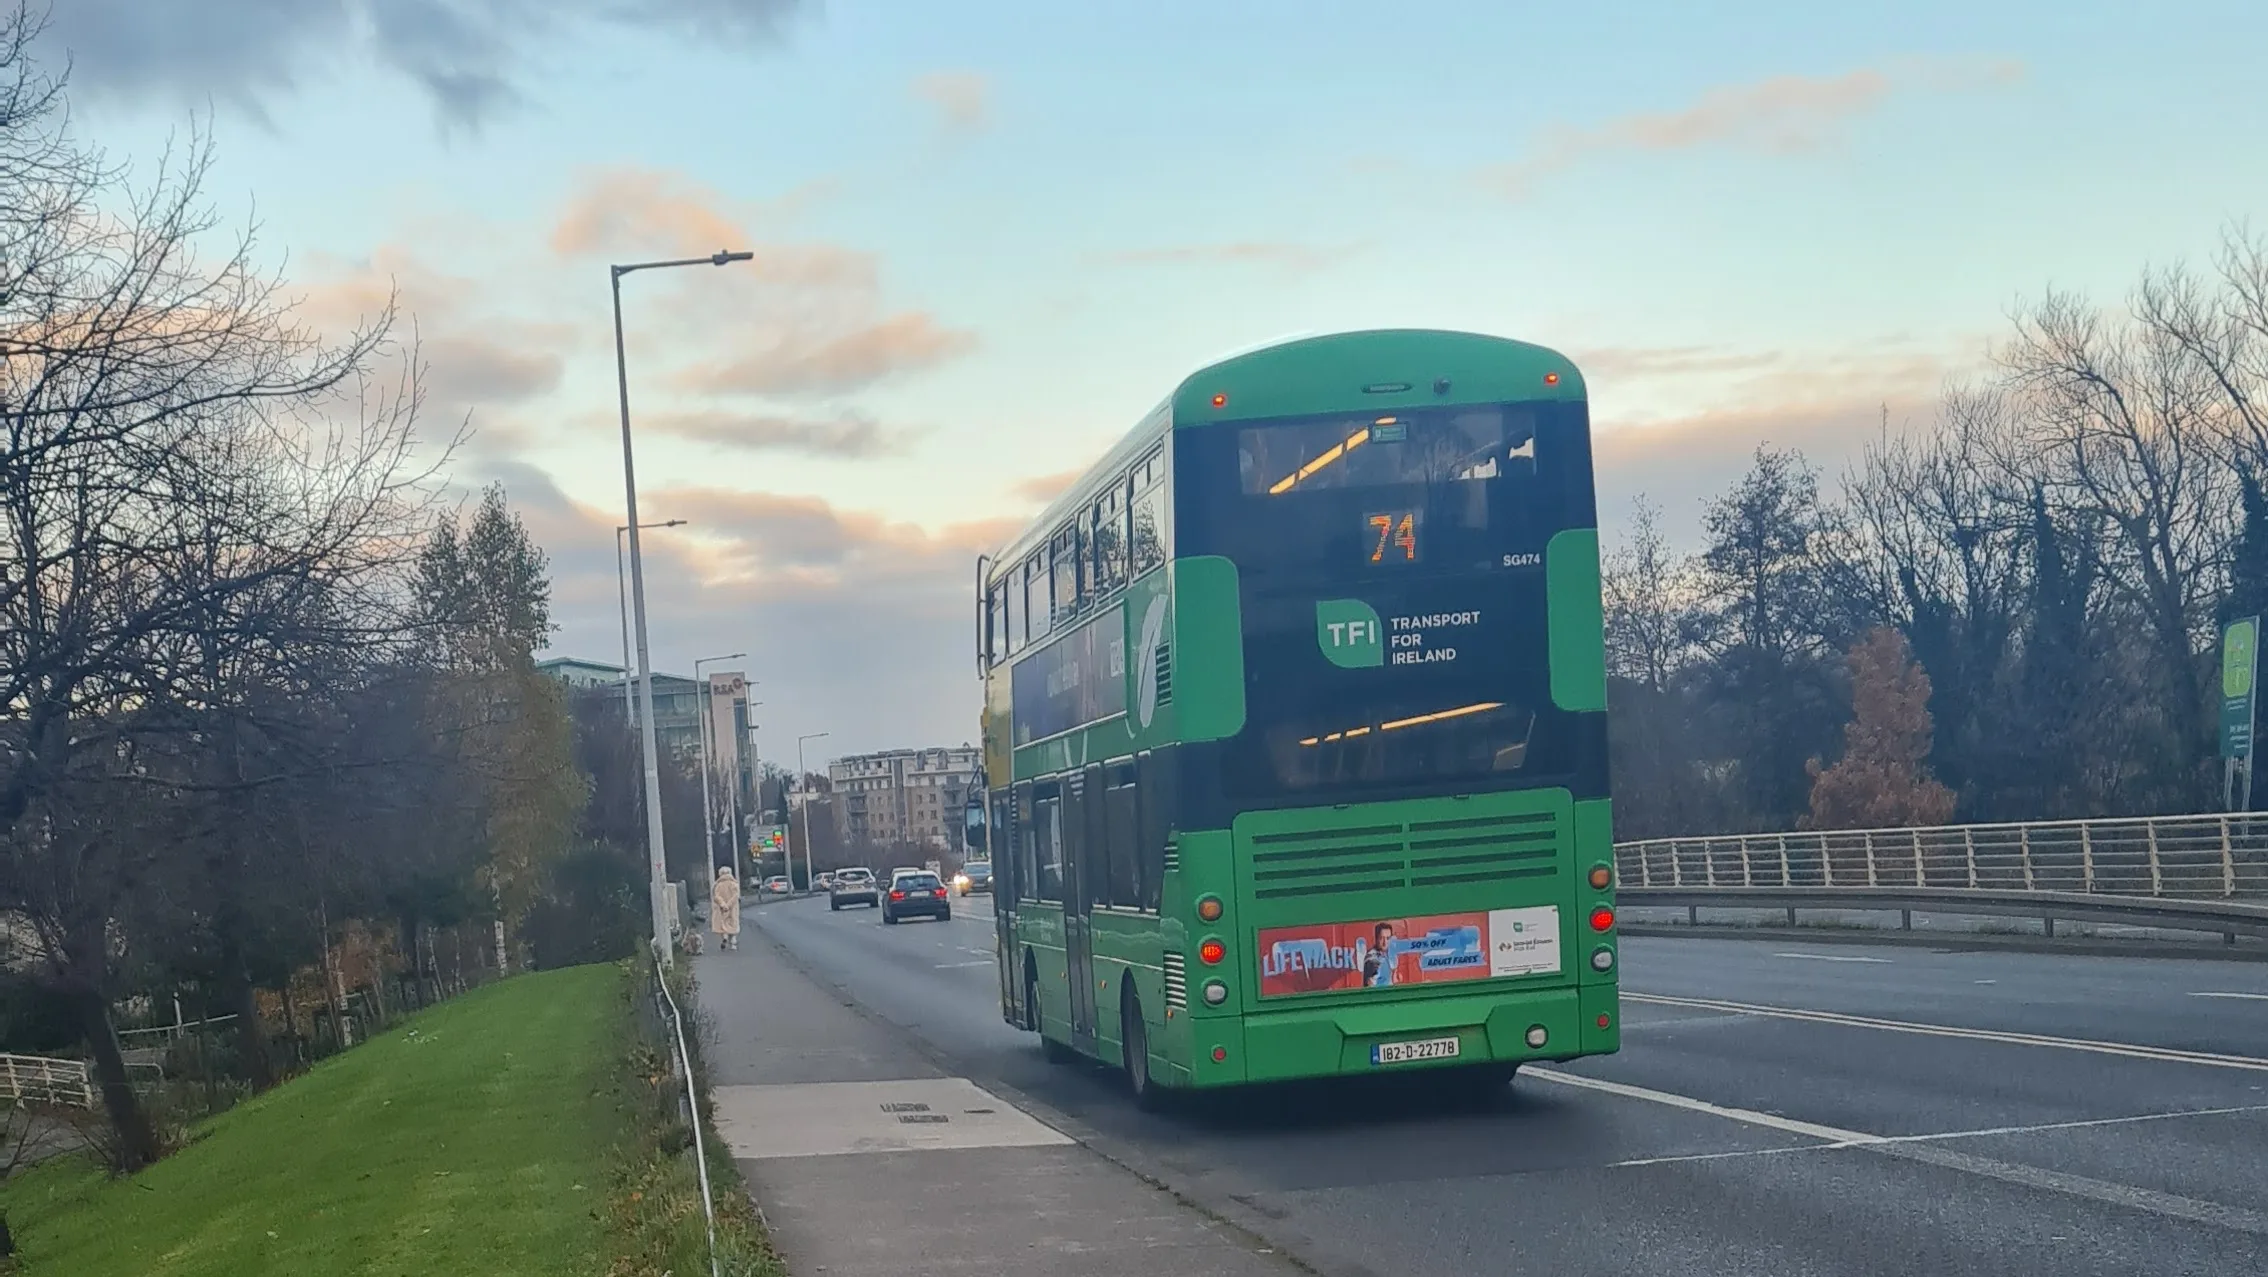 74 bus connects feedback on all buses